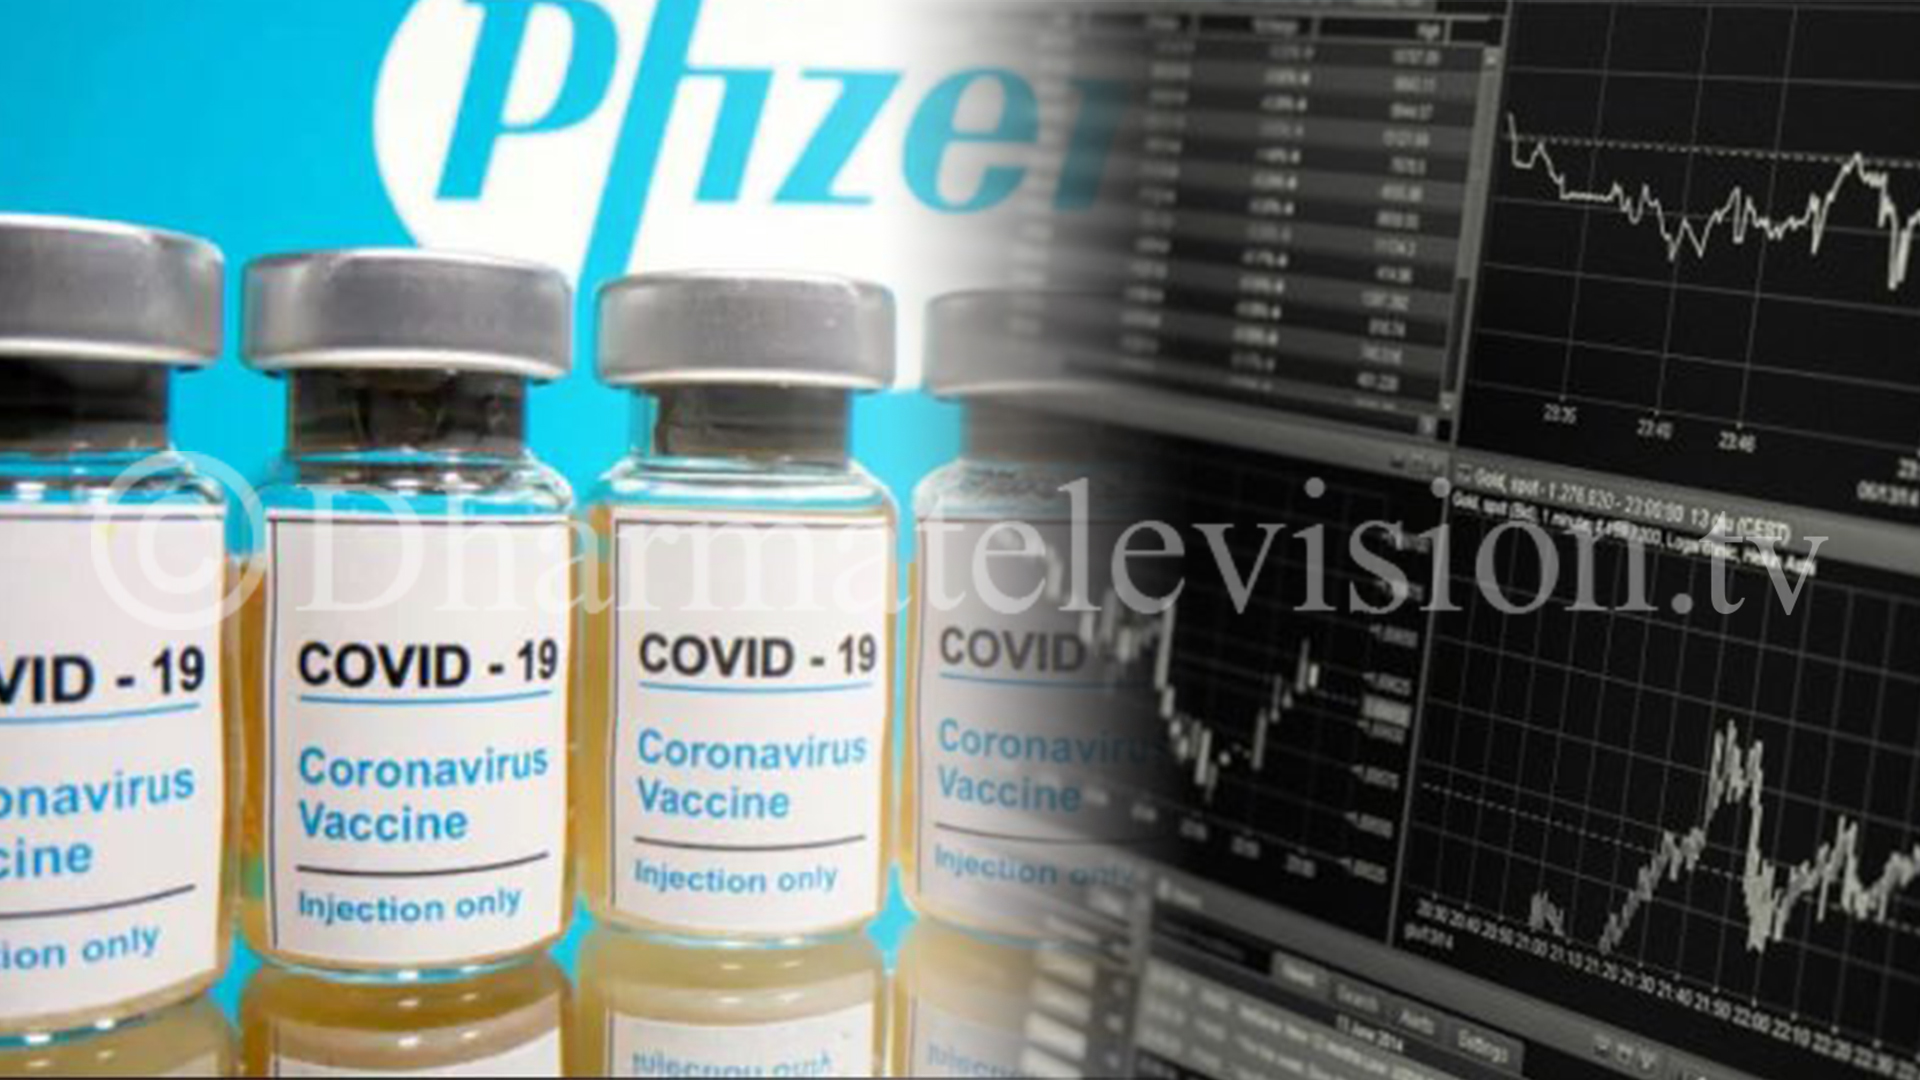 Pfizer's coronavirus vaccine hope helps boost stock market and oil prices